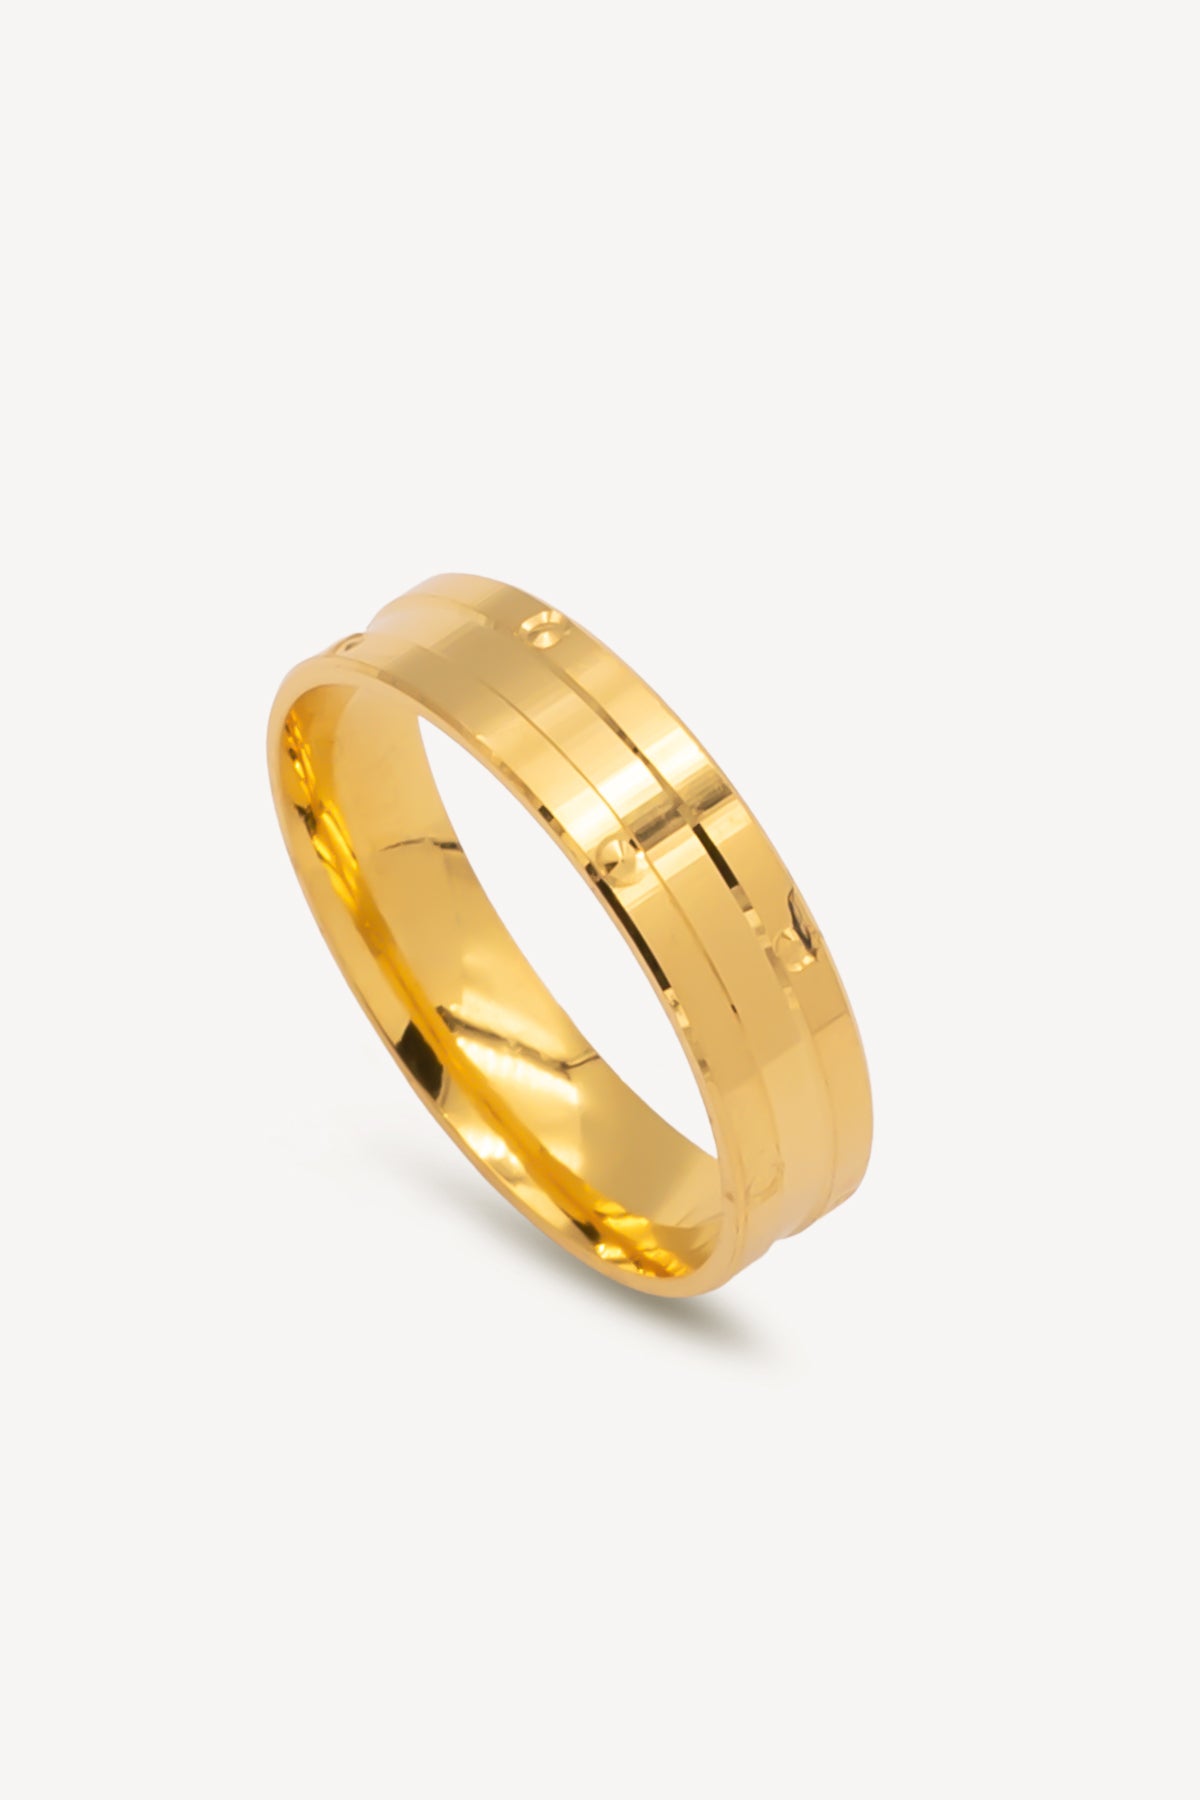 UDS CREATION GOLD PLATED RING/1 YEAR VALIDITY FOR RING Alloy Gold Plated  Ring Price in India - Buy UDS CREATION GOLD PLATED RING/1 YEAR VALIDITY FOR  RING Alloy Gold Plated Ring Online